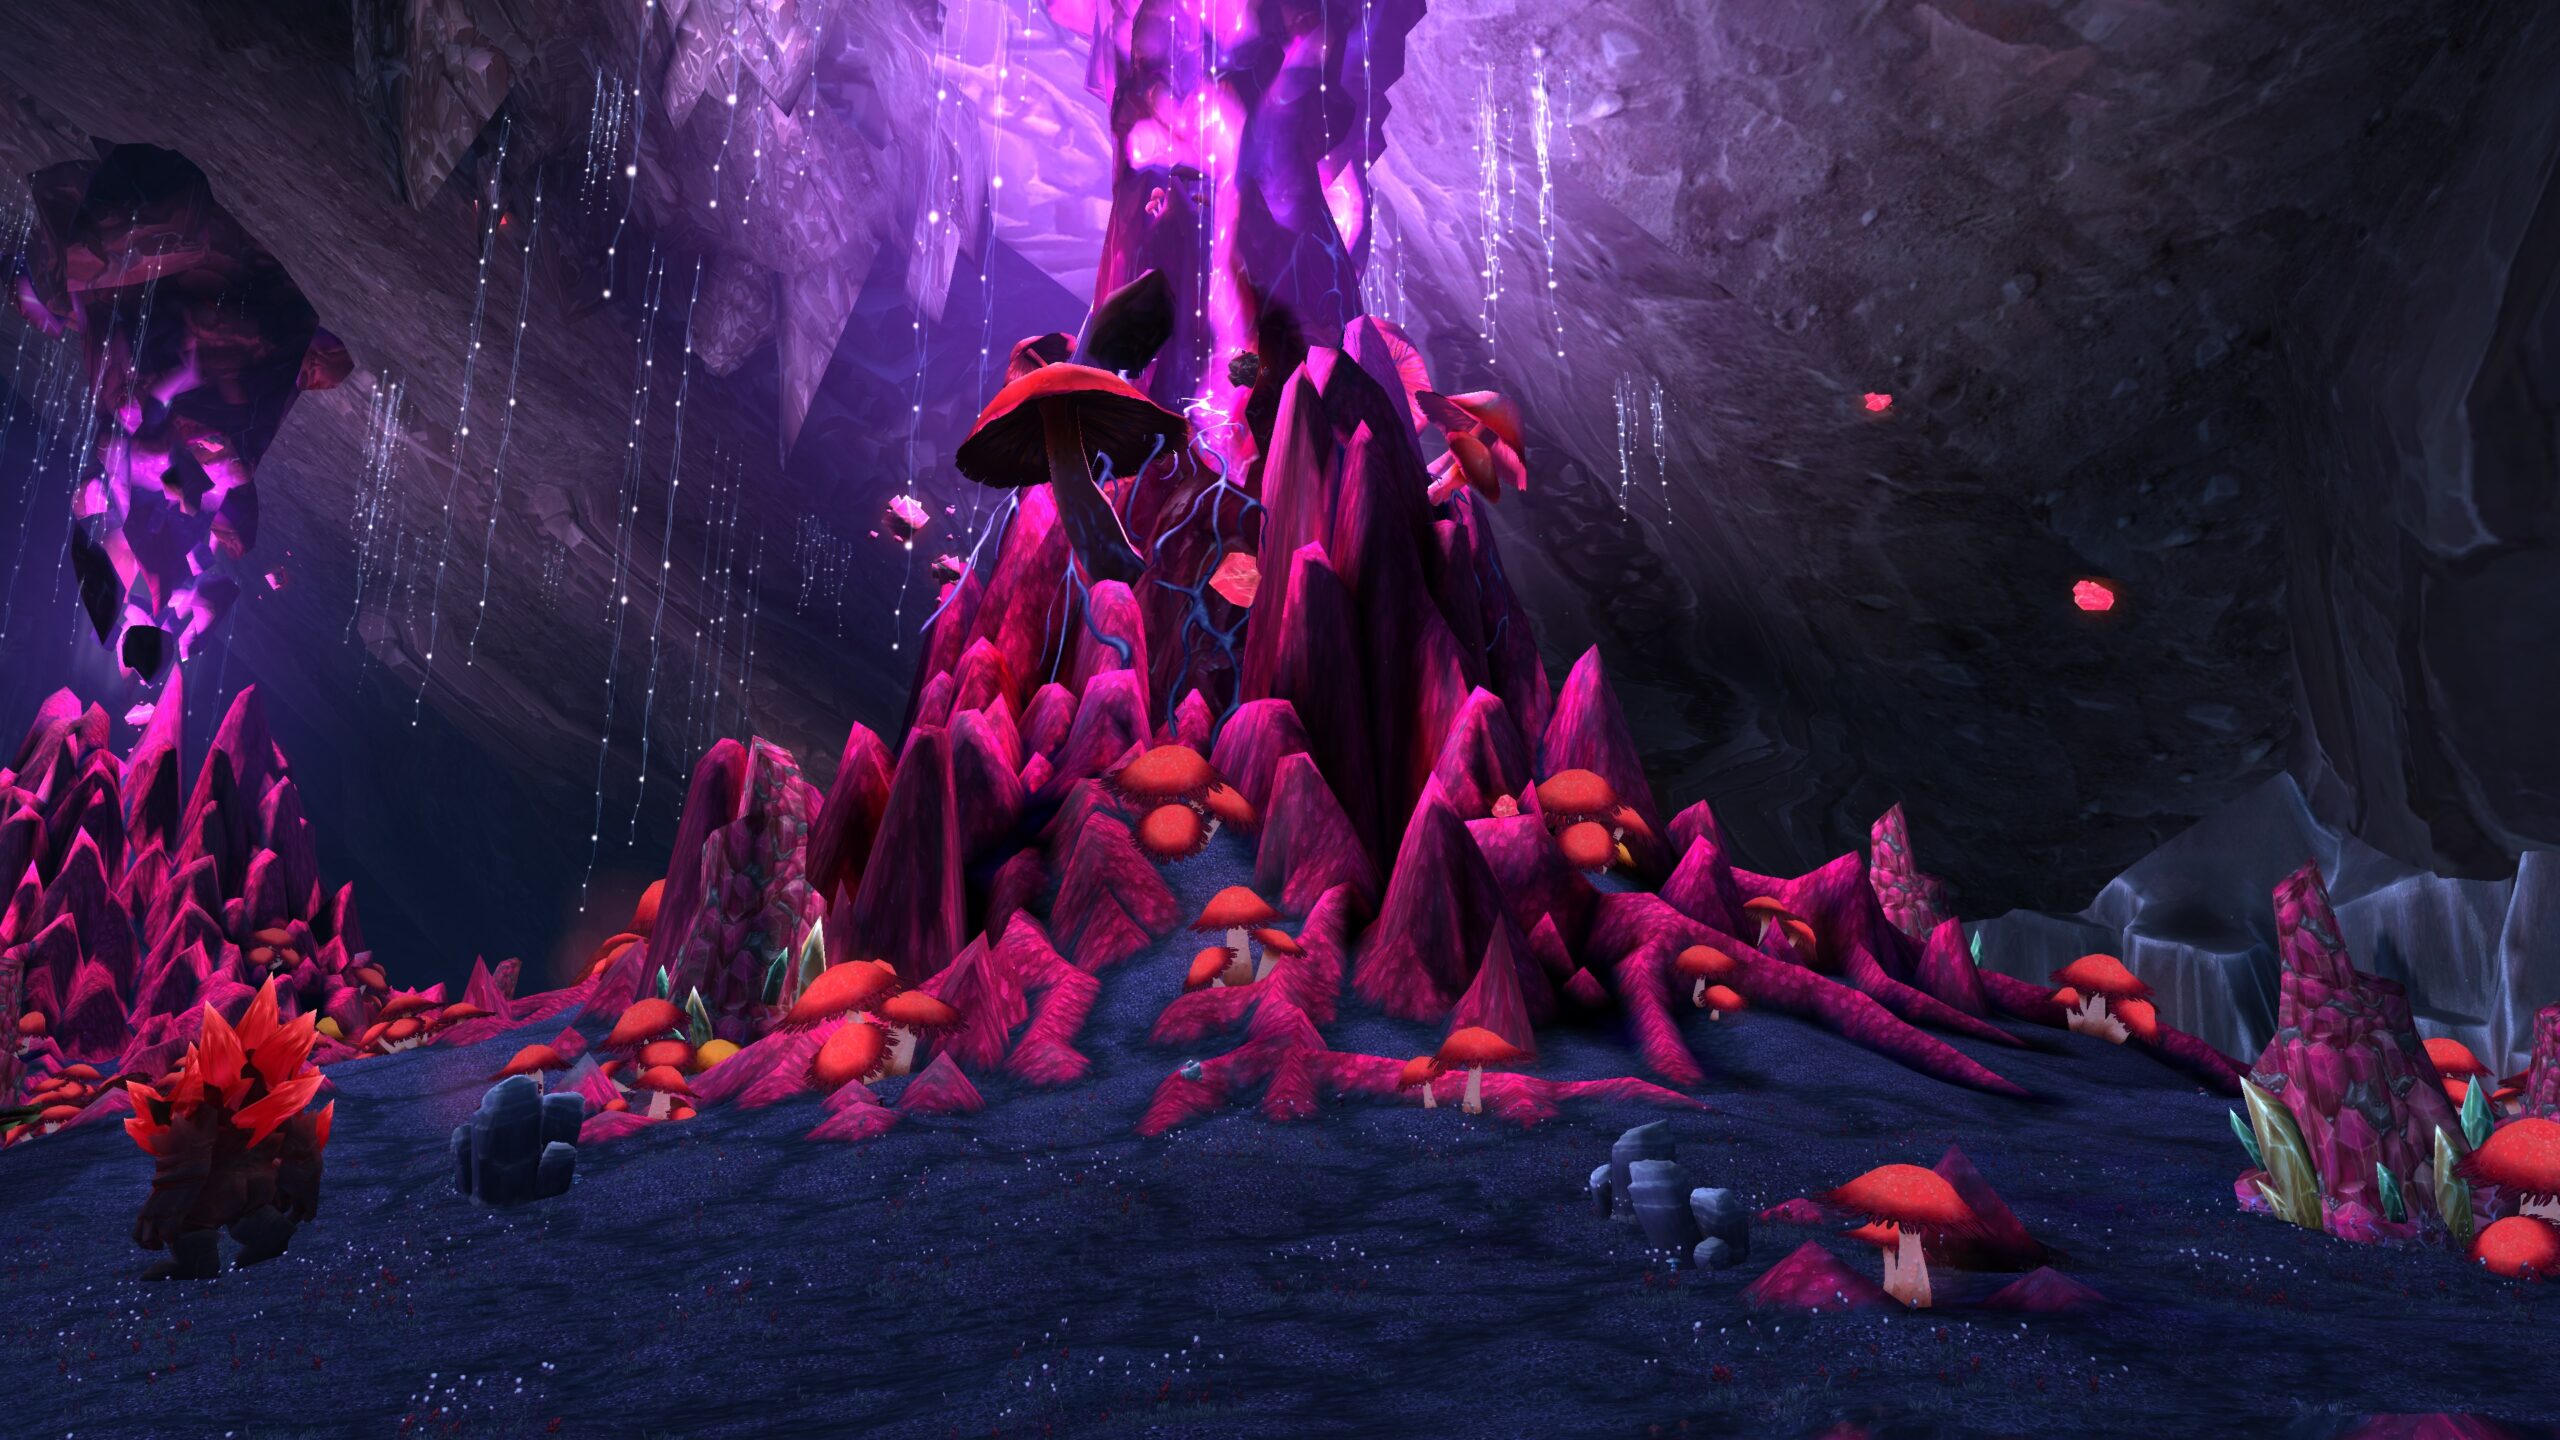 A screenshot of the World of Warcraft zone Deepholm, which is a giant underground zone with vibrant colors, rock structures, and mushrooms.